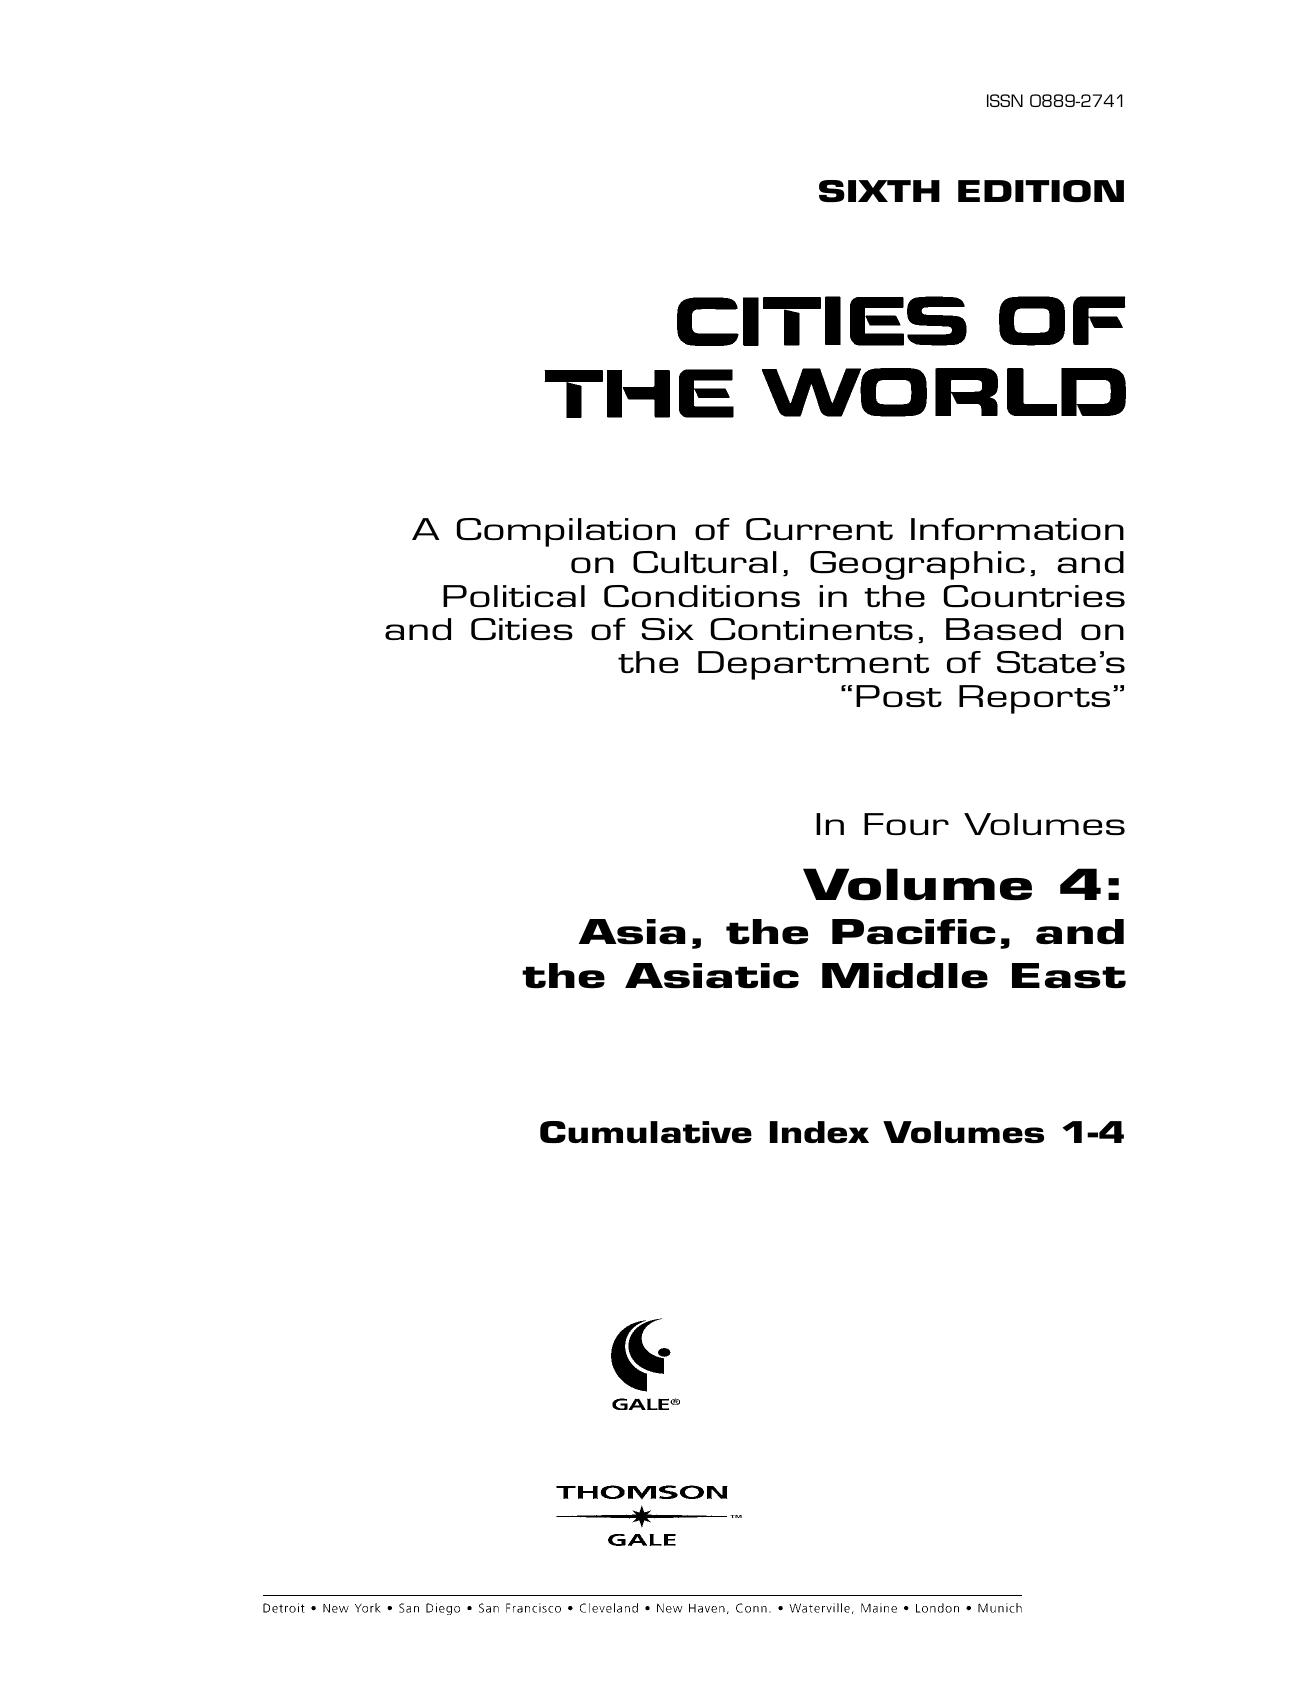 Gale - Cities of the World 6th edition - Vol 4